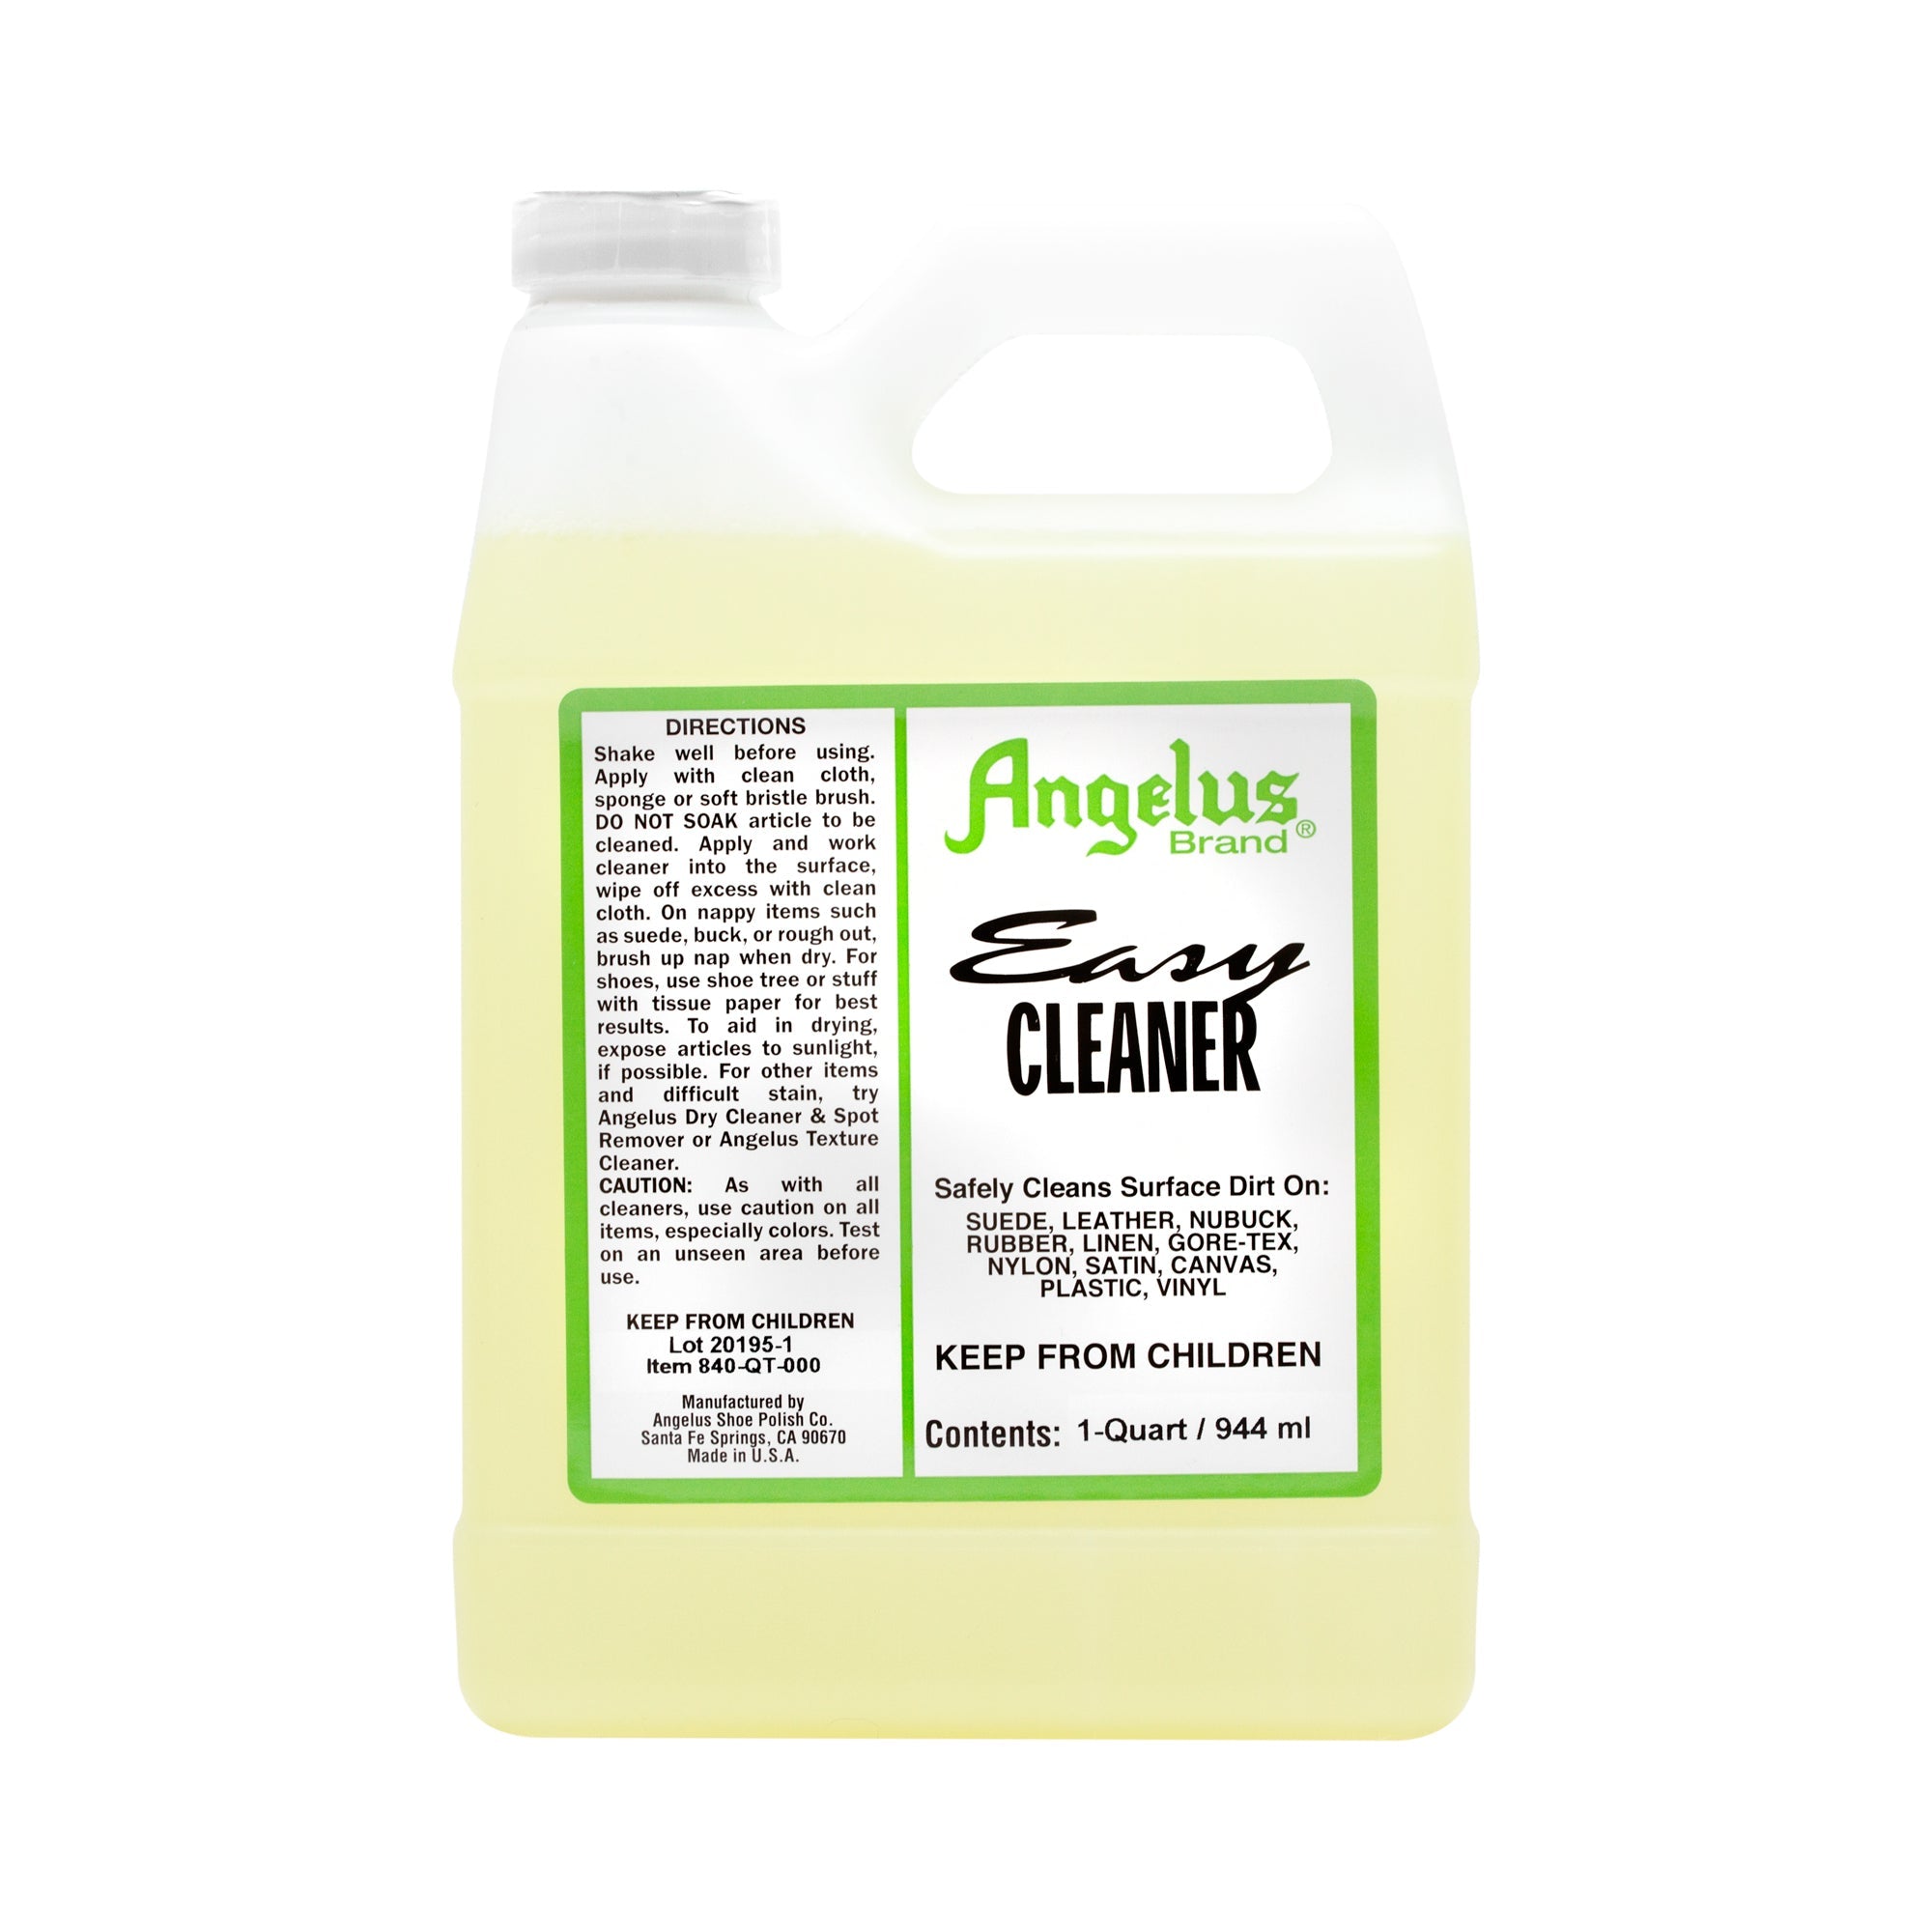 Easy Cleaner - Angelus Direct